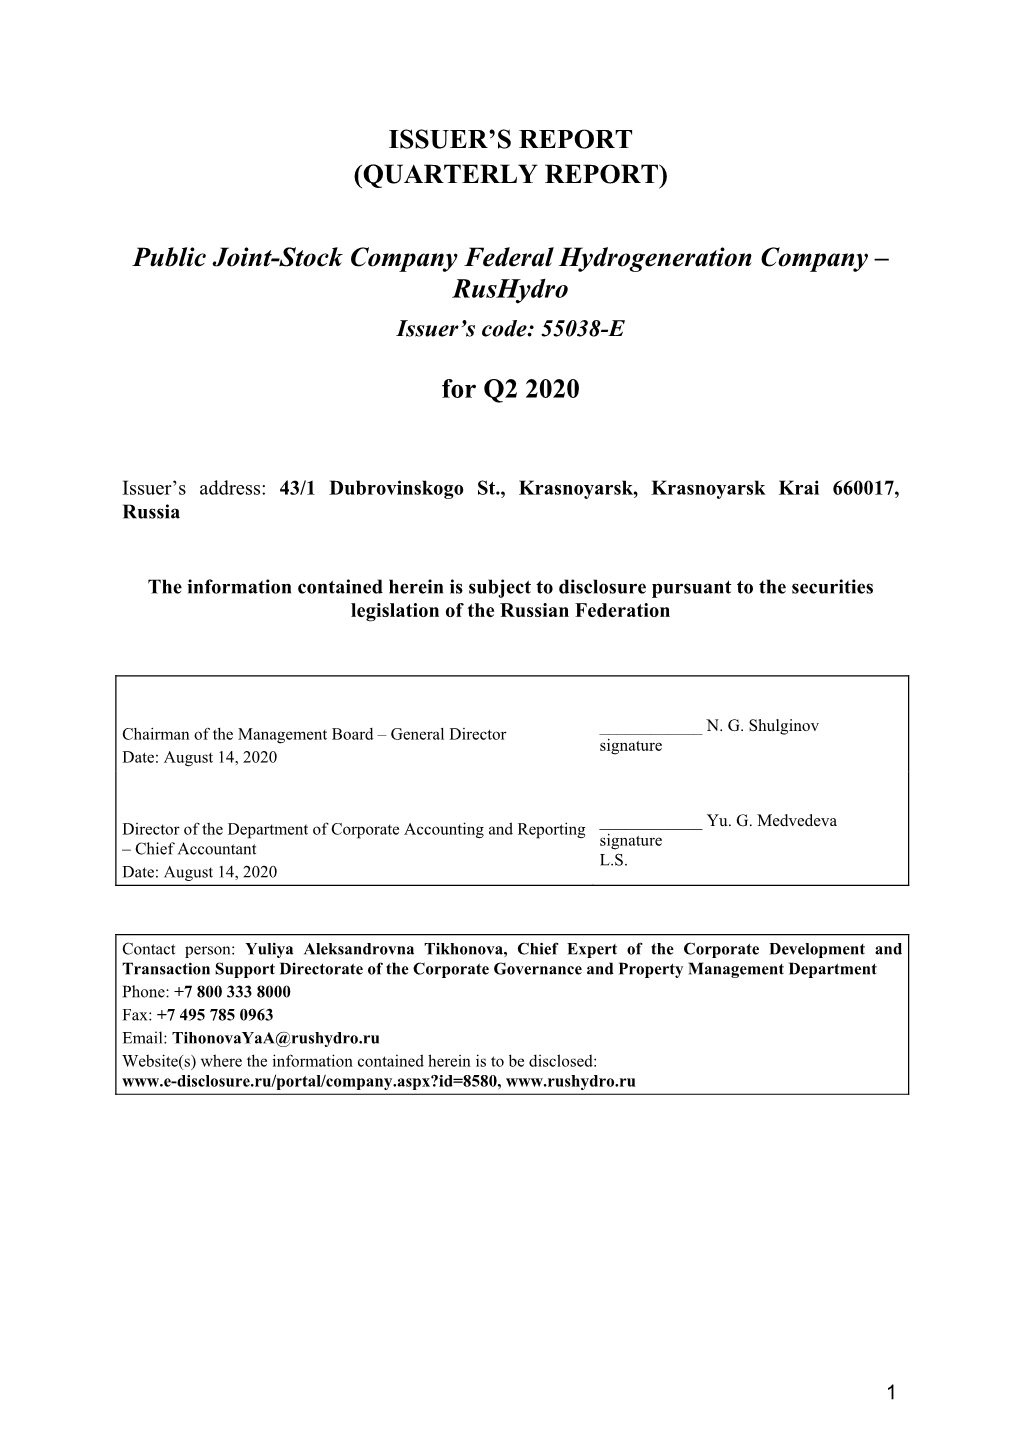 ISSUER's REPORT (QUARTERLY REPORT) Public Joint-Stock Company Federal Hydrogeneration Company – Rushydro for Q2 2020